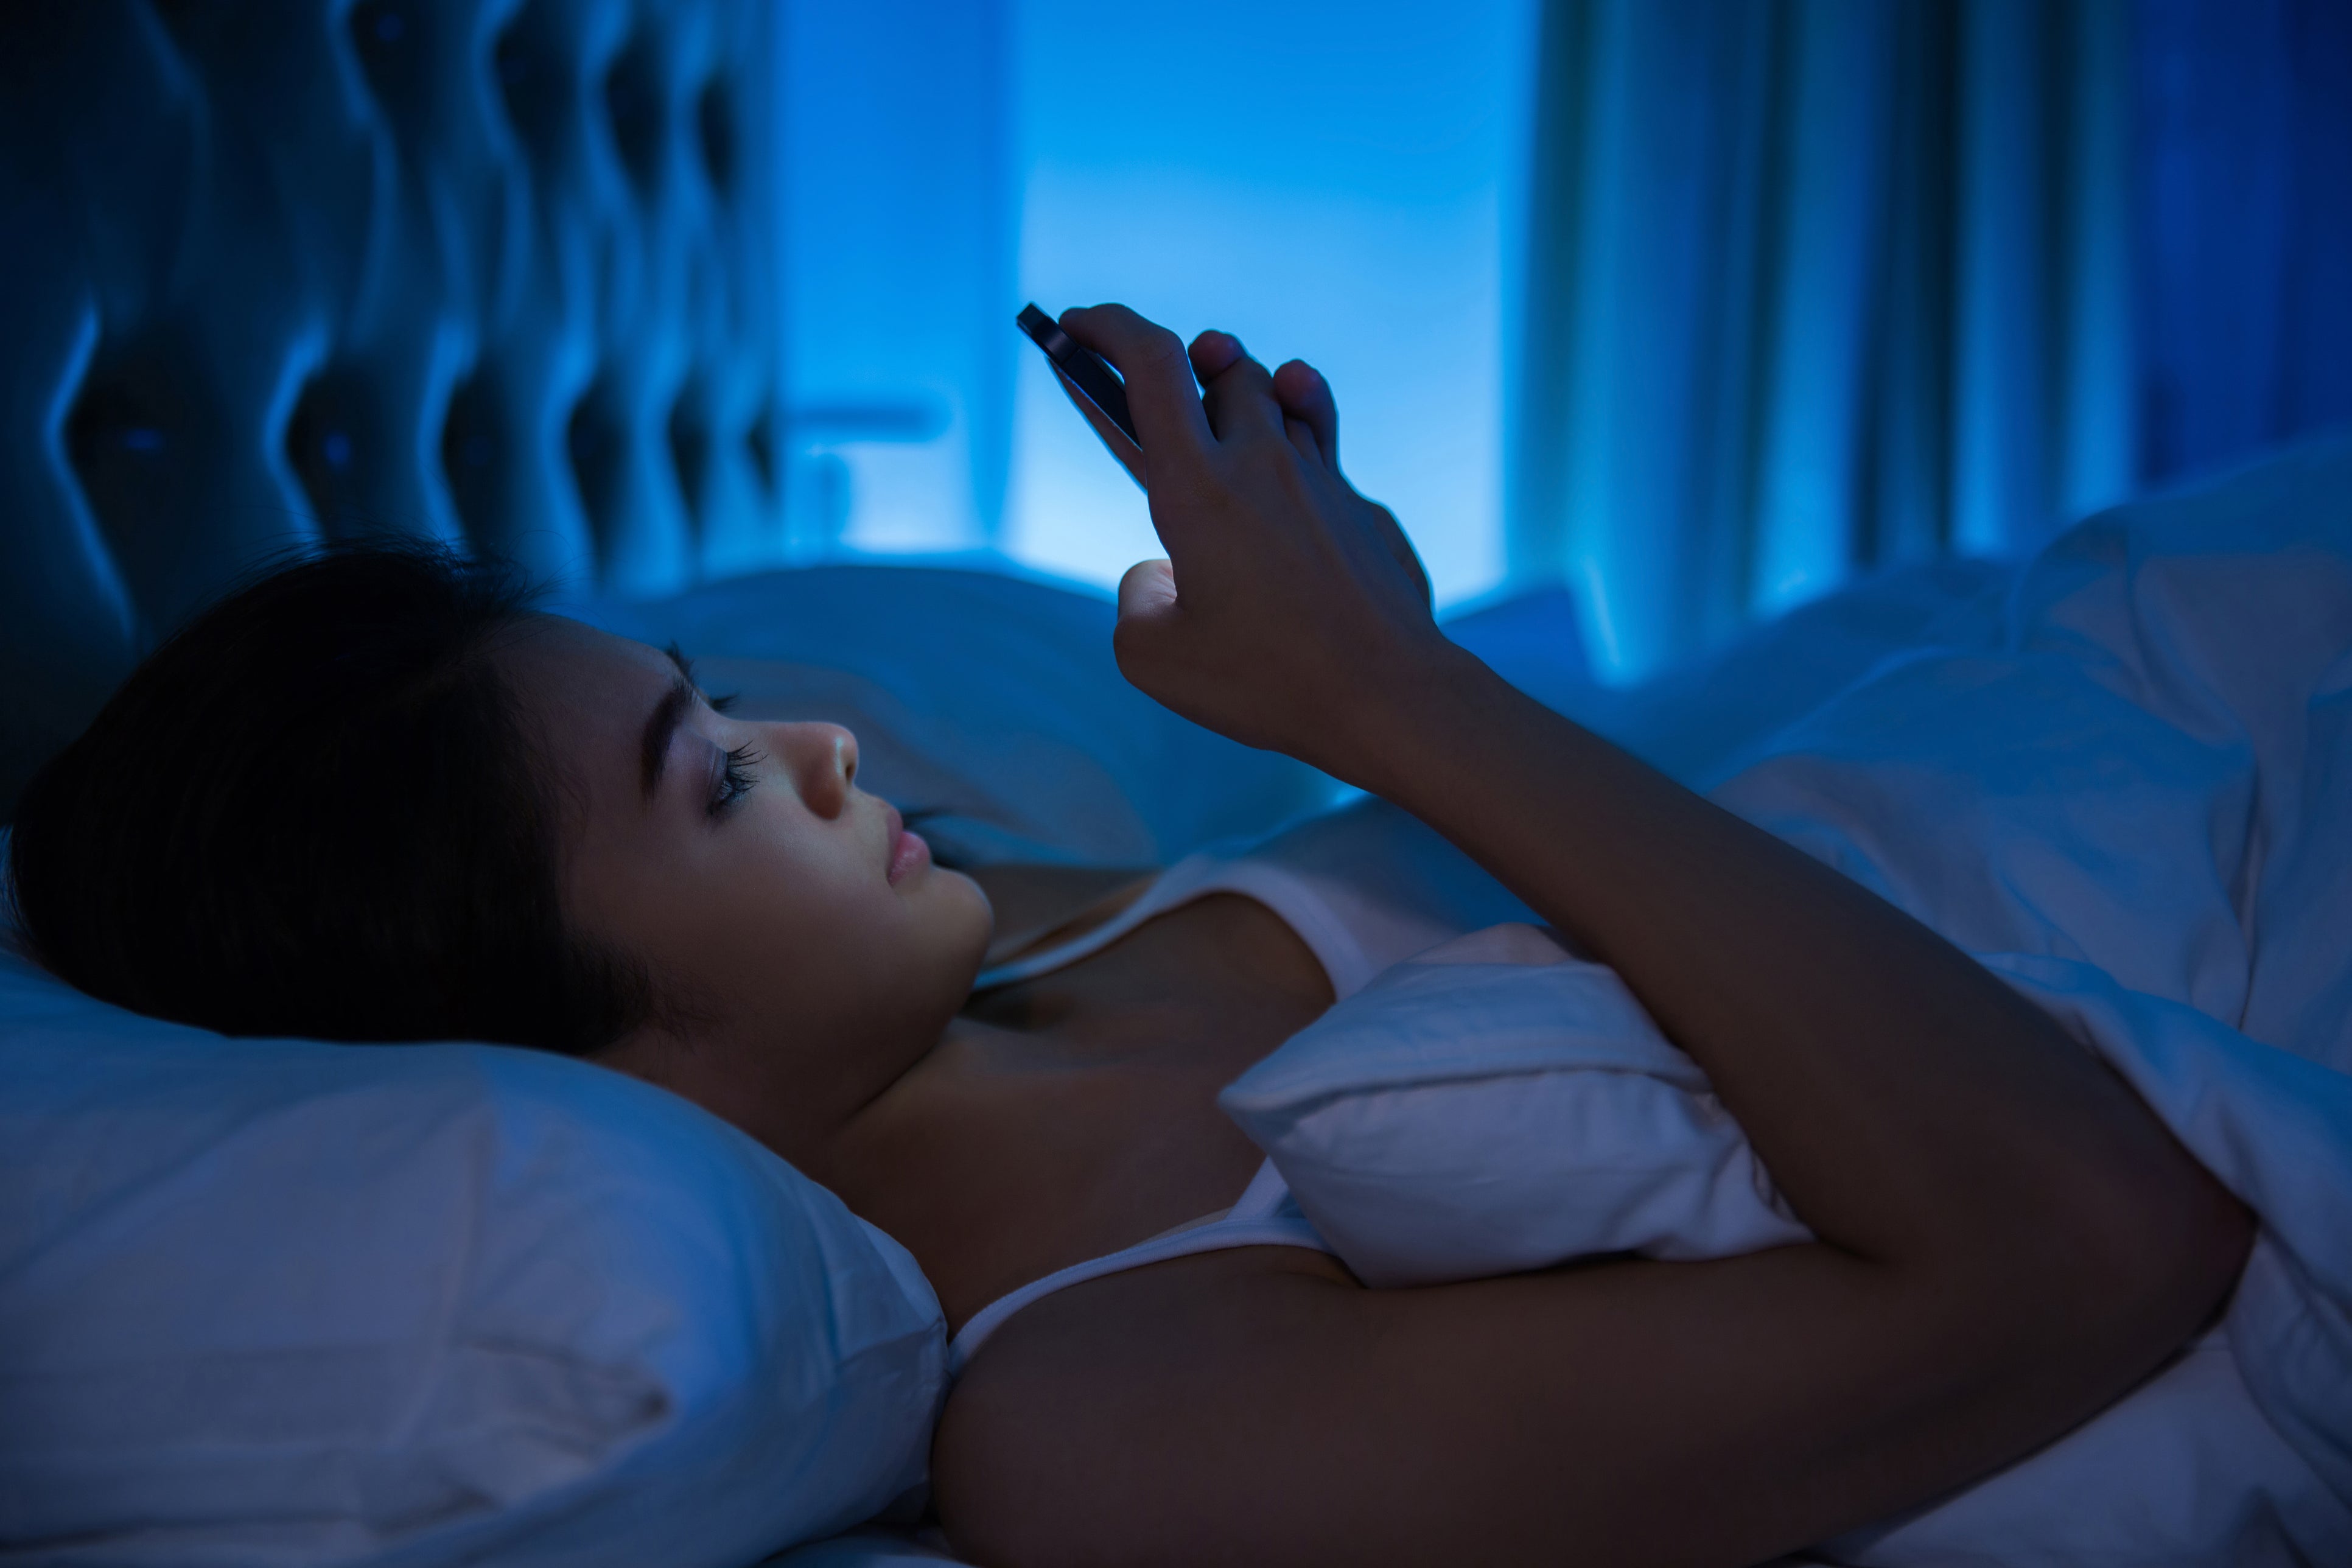 The temptation of staying up late, texting, talking and scrolling, is almost too hard to resist